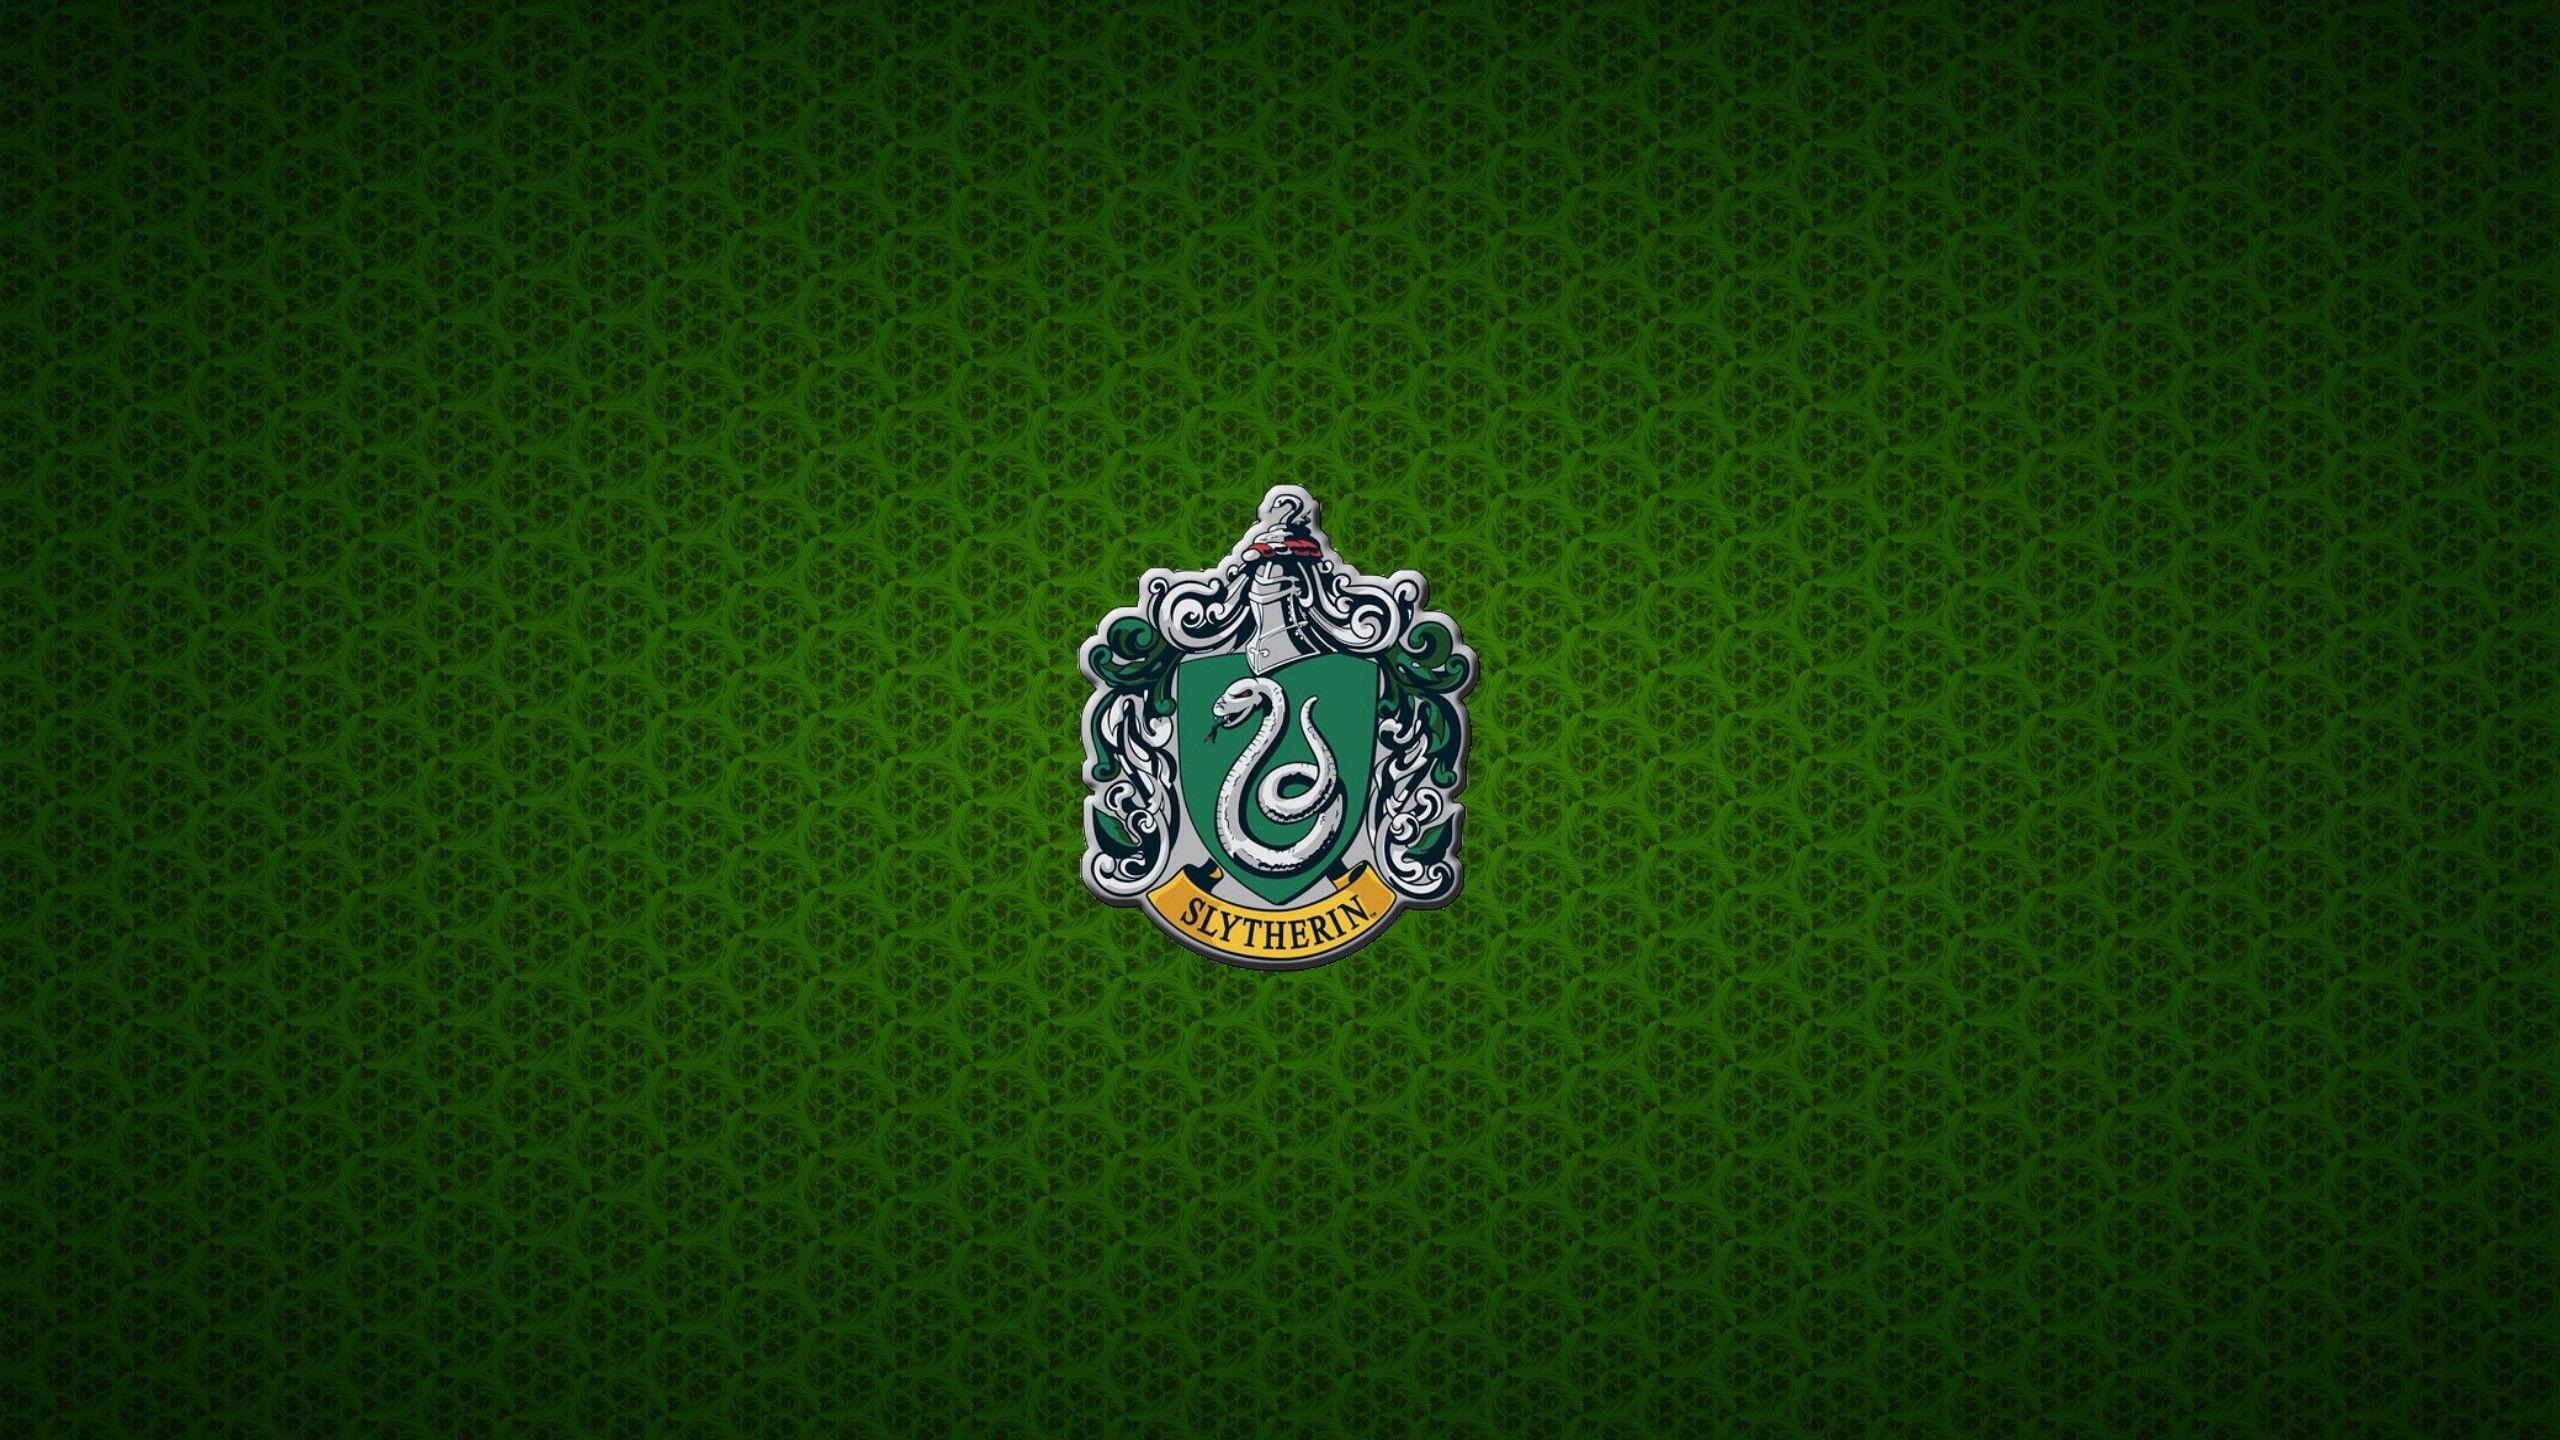 Slytherin Wallpapers - Top Free Slytherin Backgrounds - WallpaperAccess